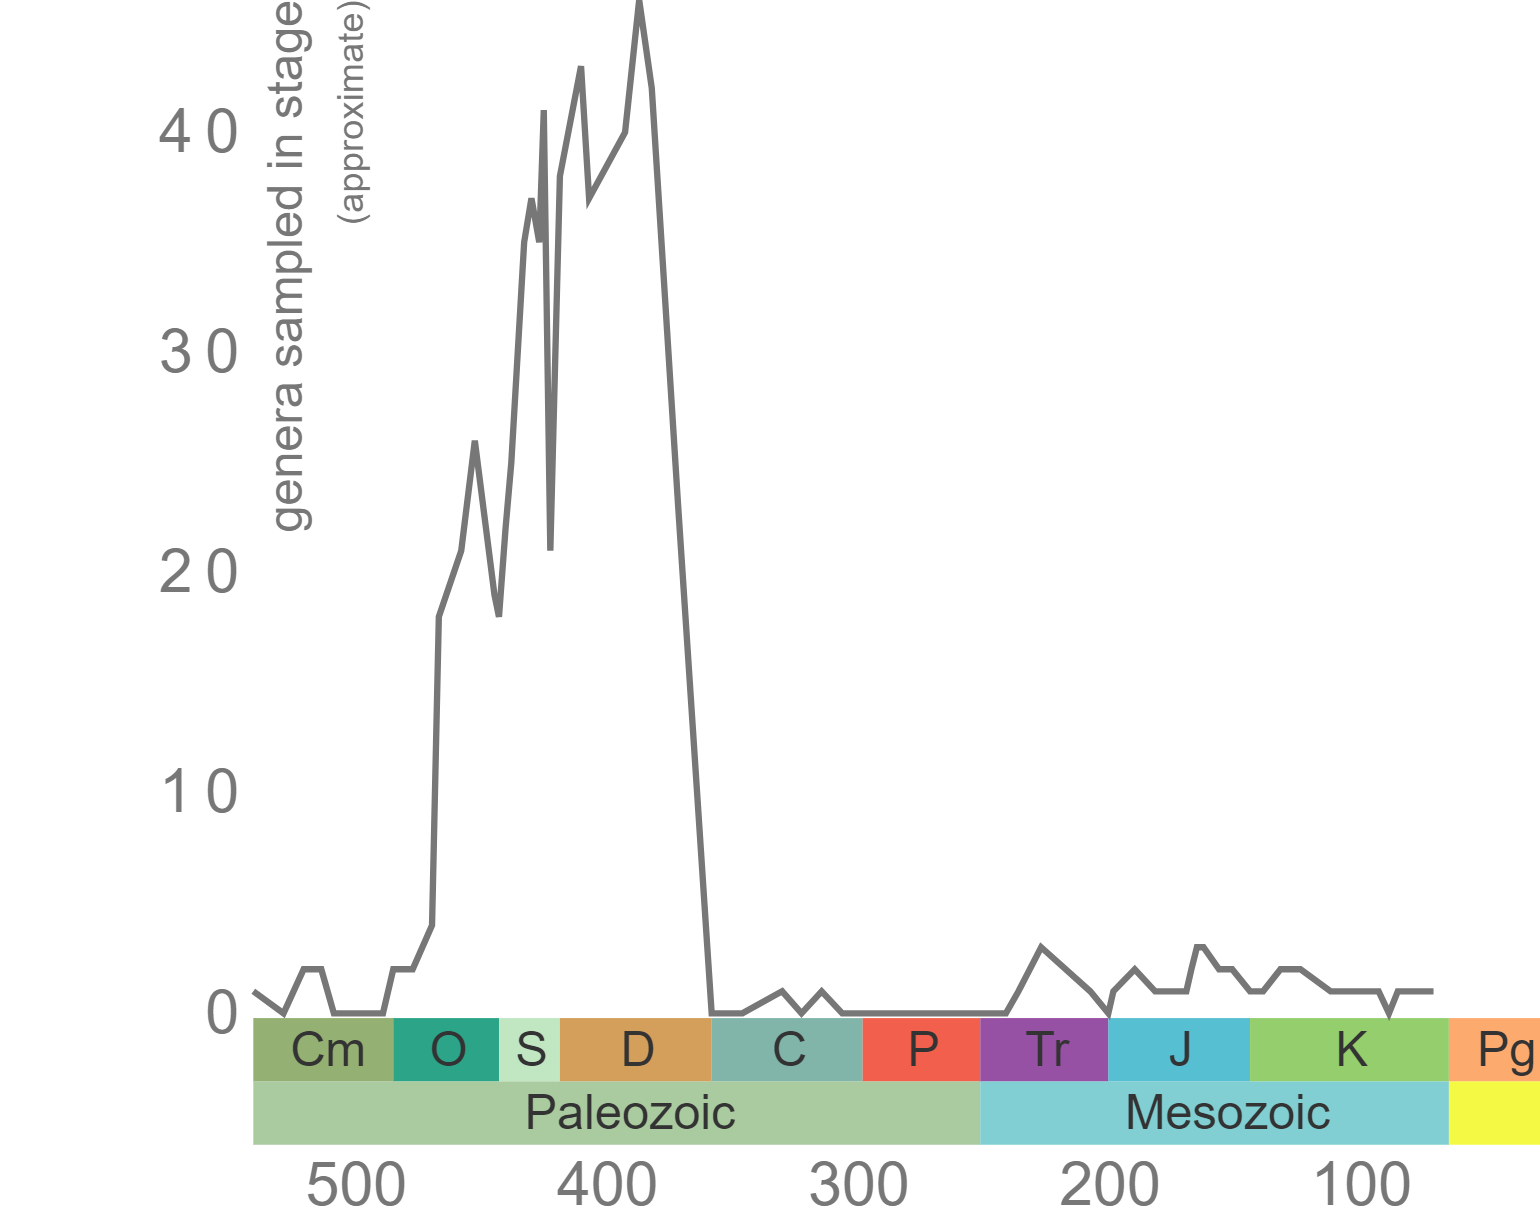 Graph showing a Stromatoporoidea diversity curve, with a peak of diversity during the Devonian period